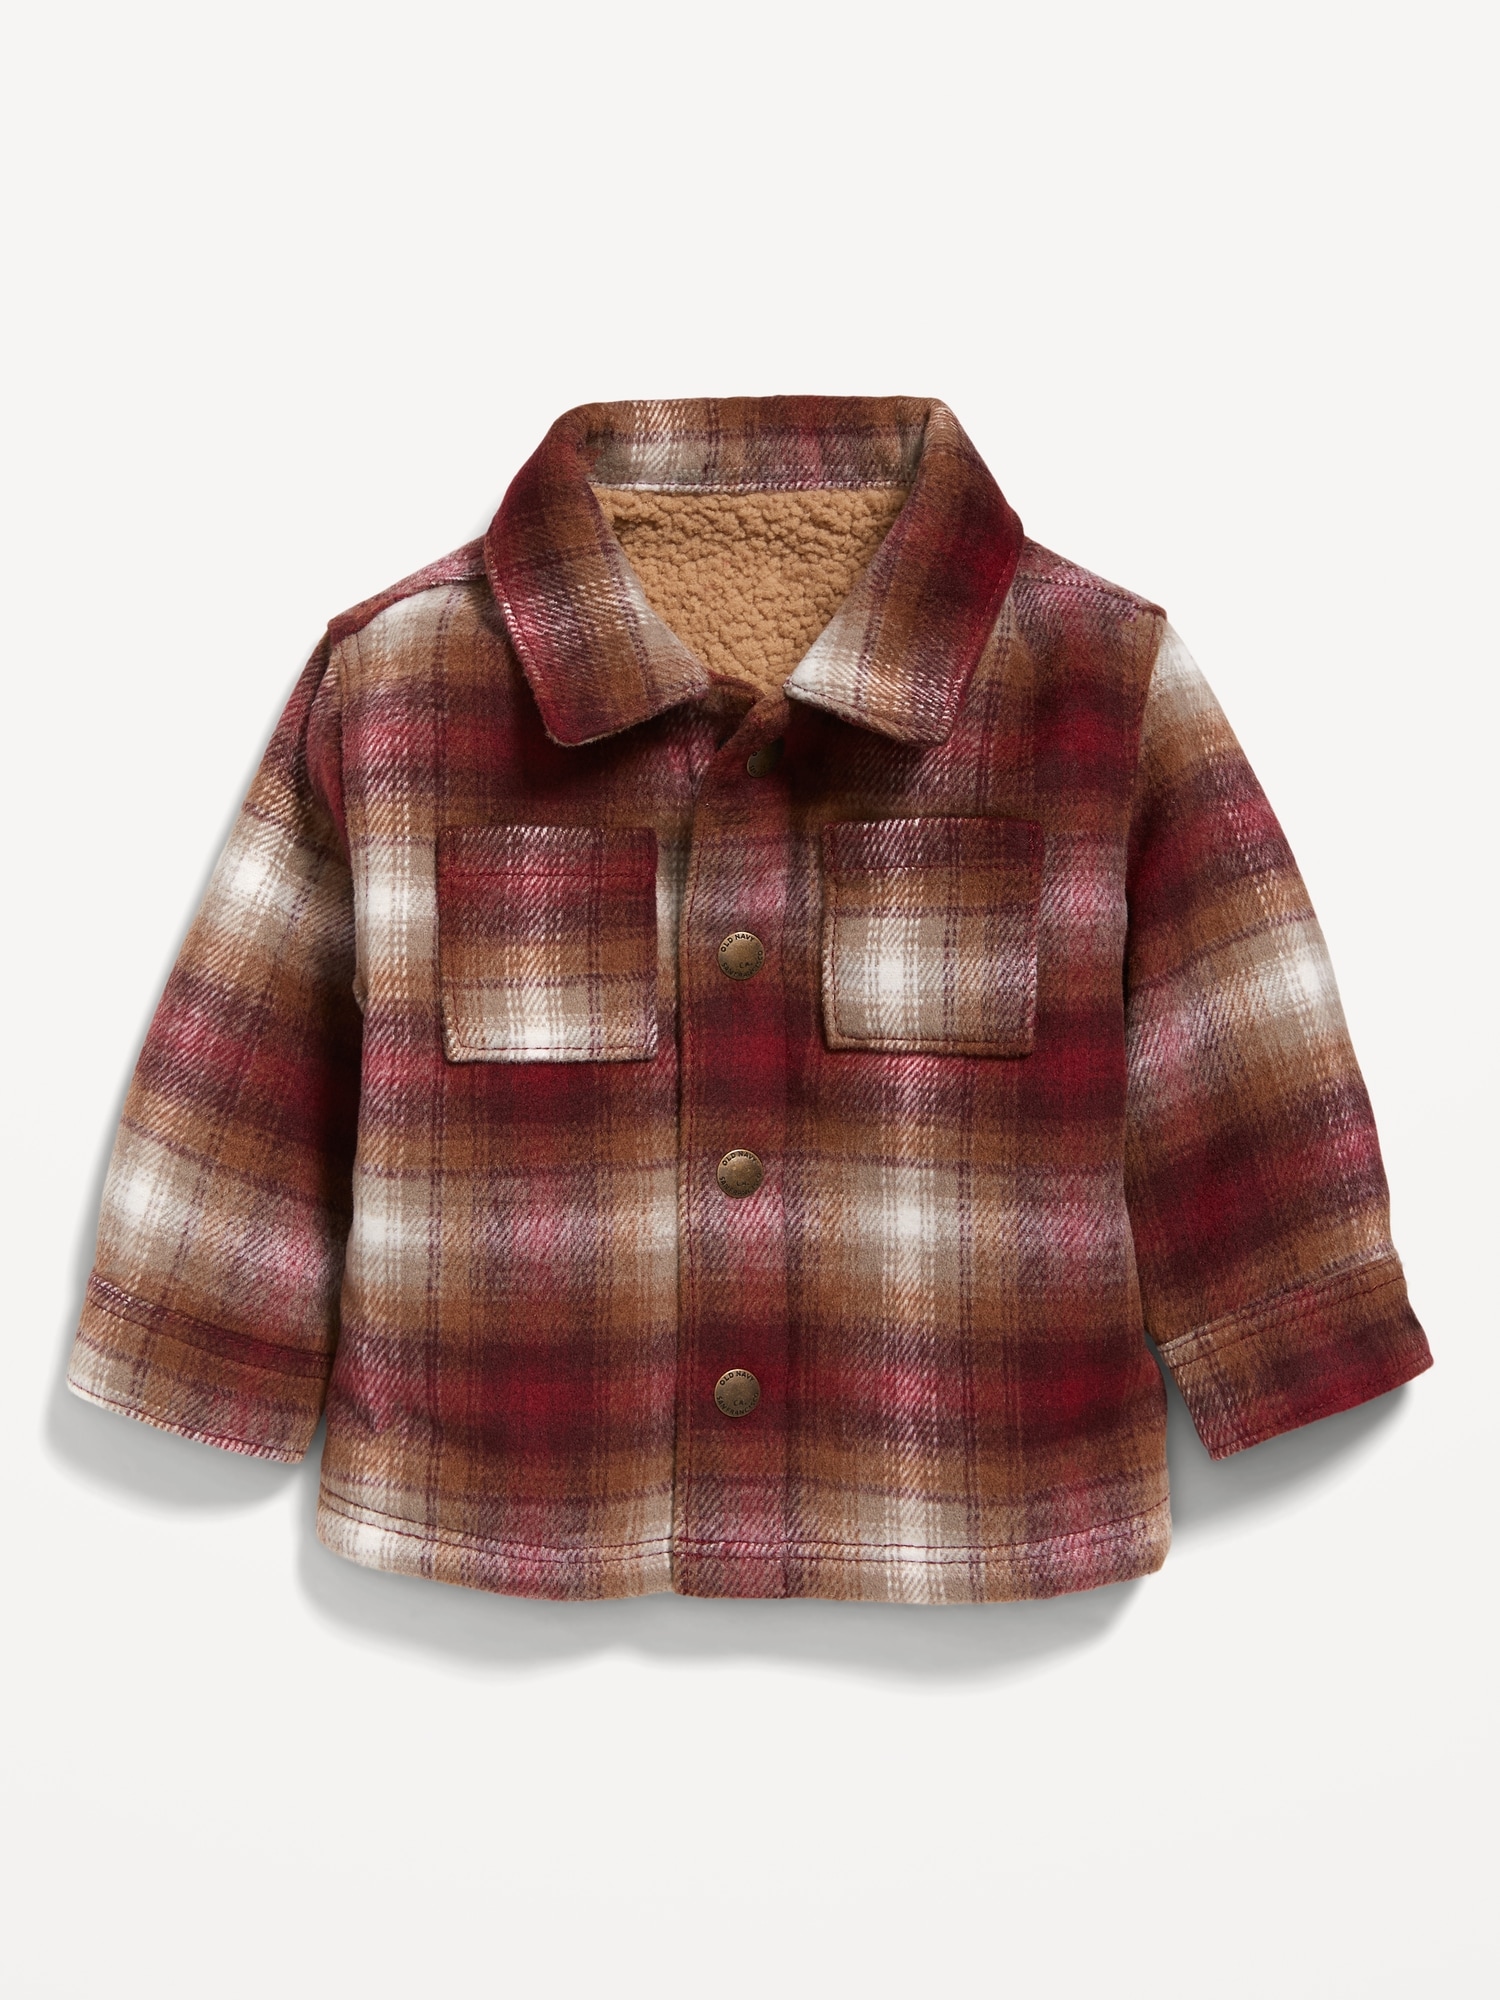 Unisex Sherpa-Lined Plaid Shacket for Baby